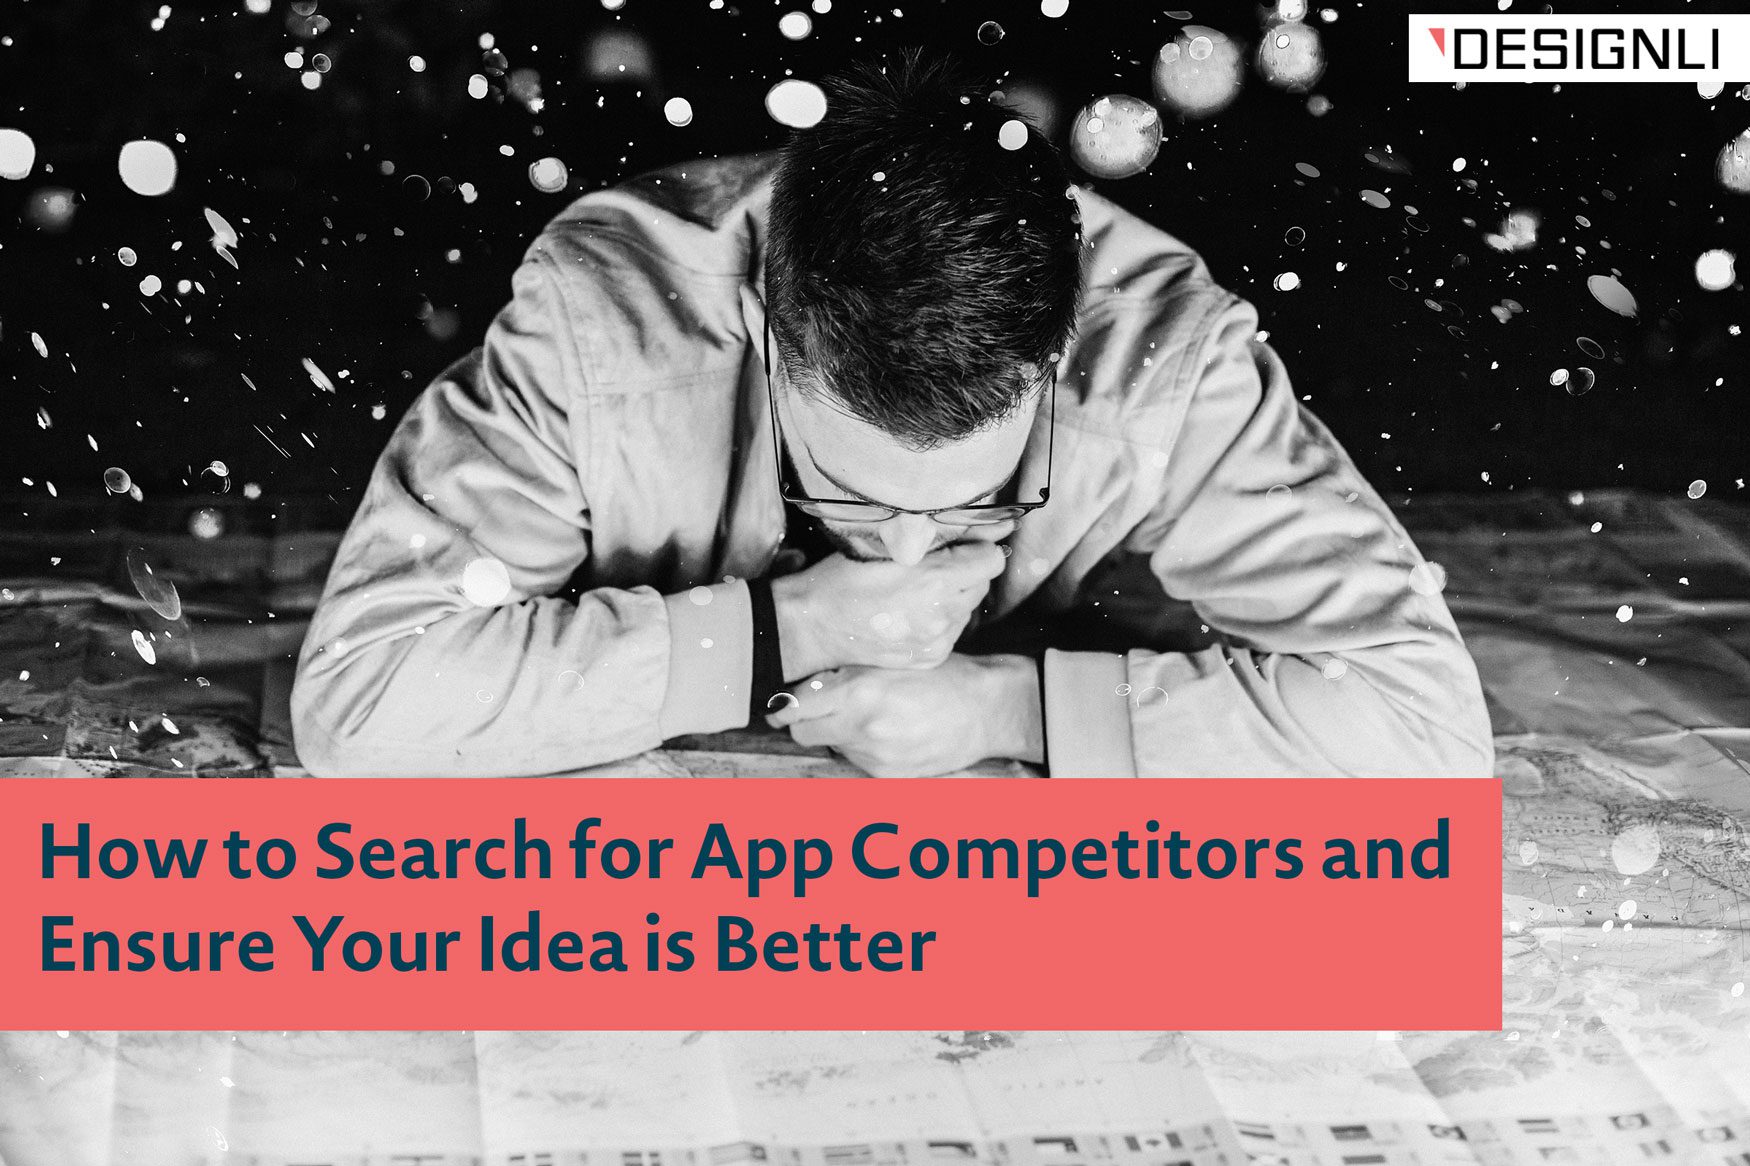 How to Search for App Competitors and Ensure Your Idea is Better